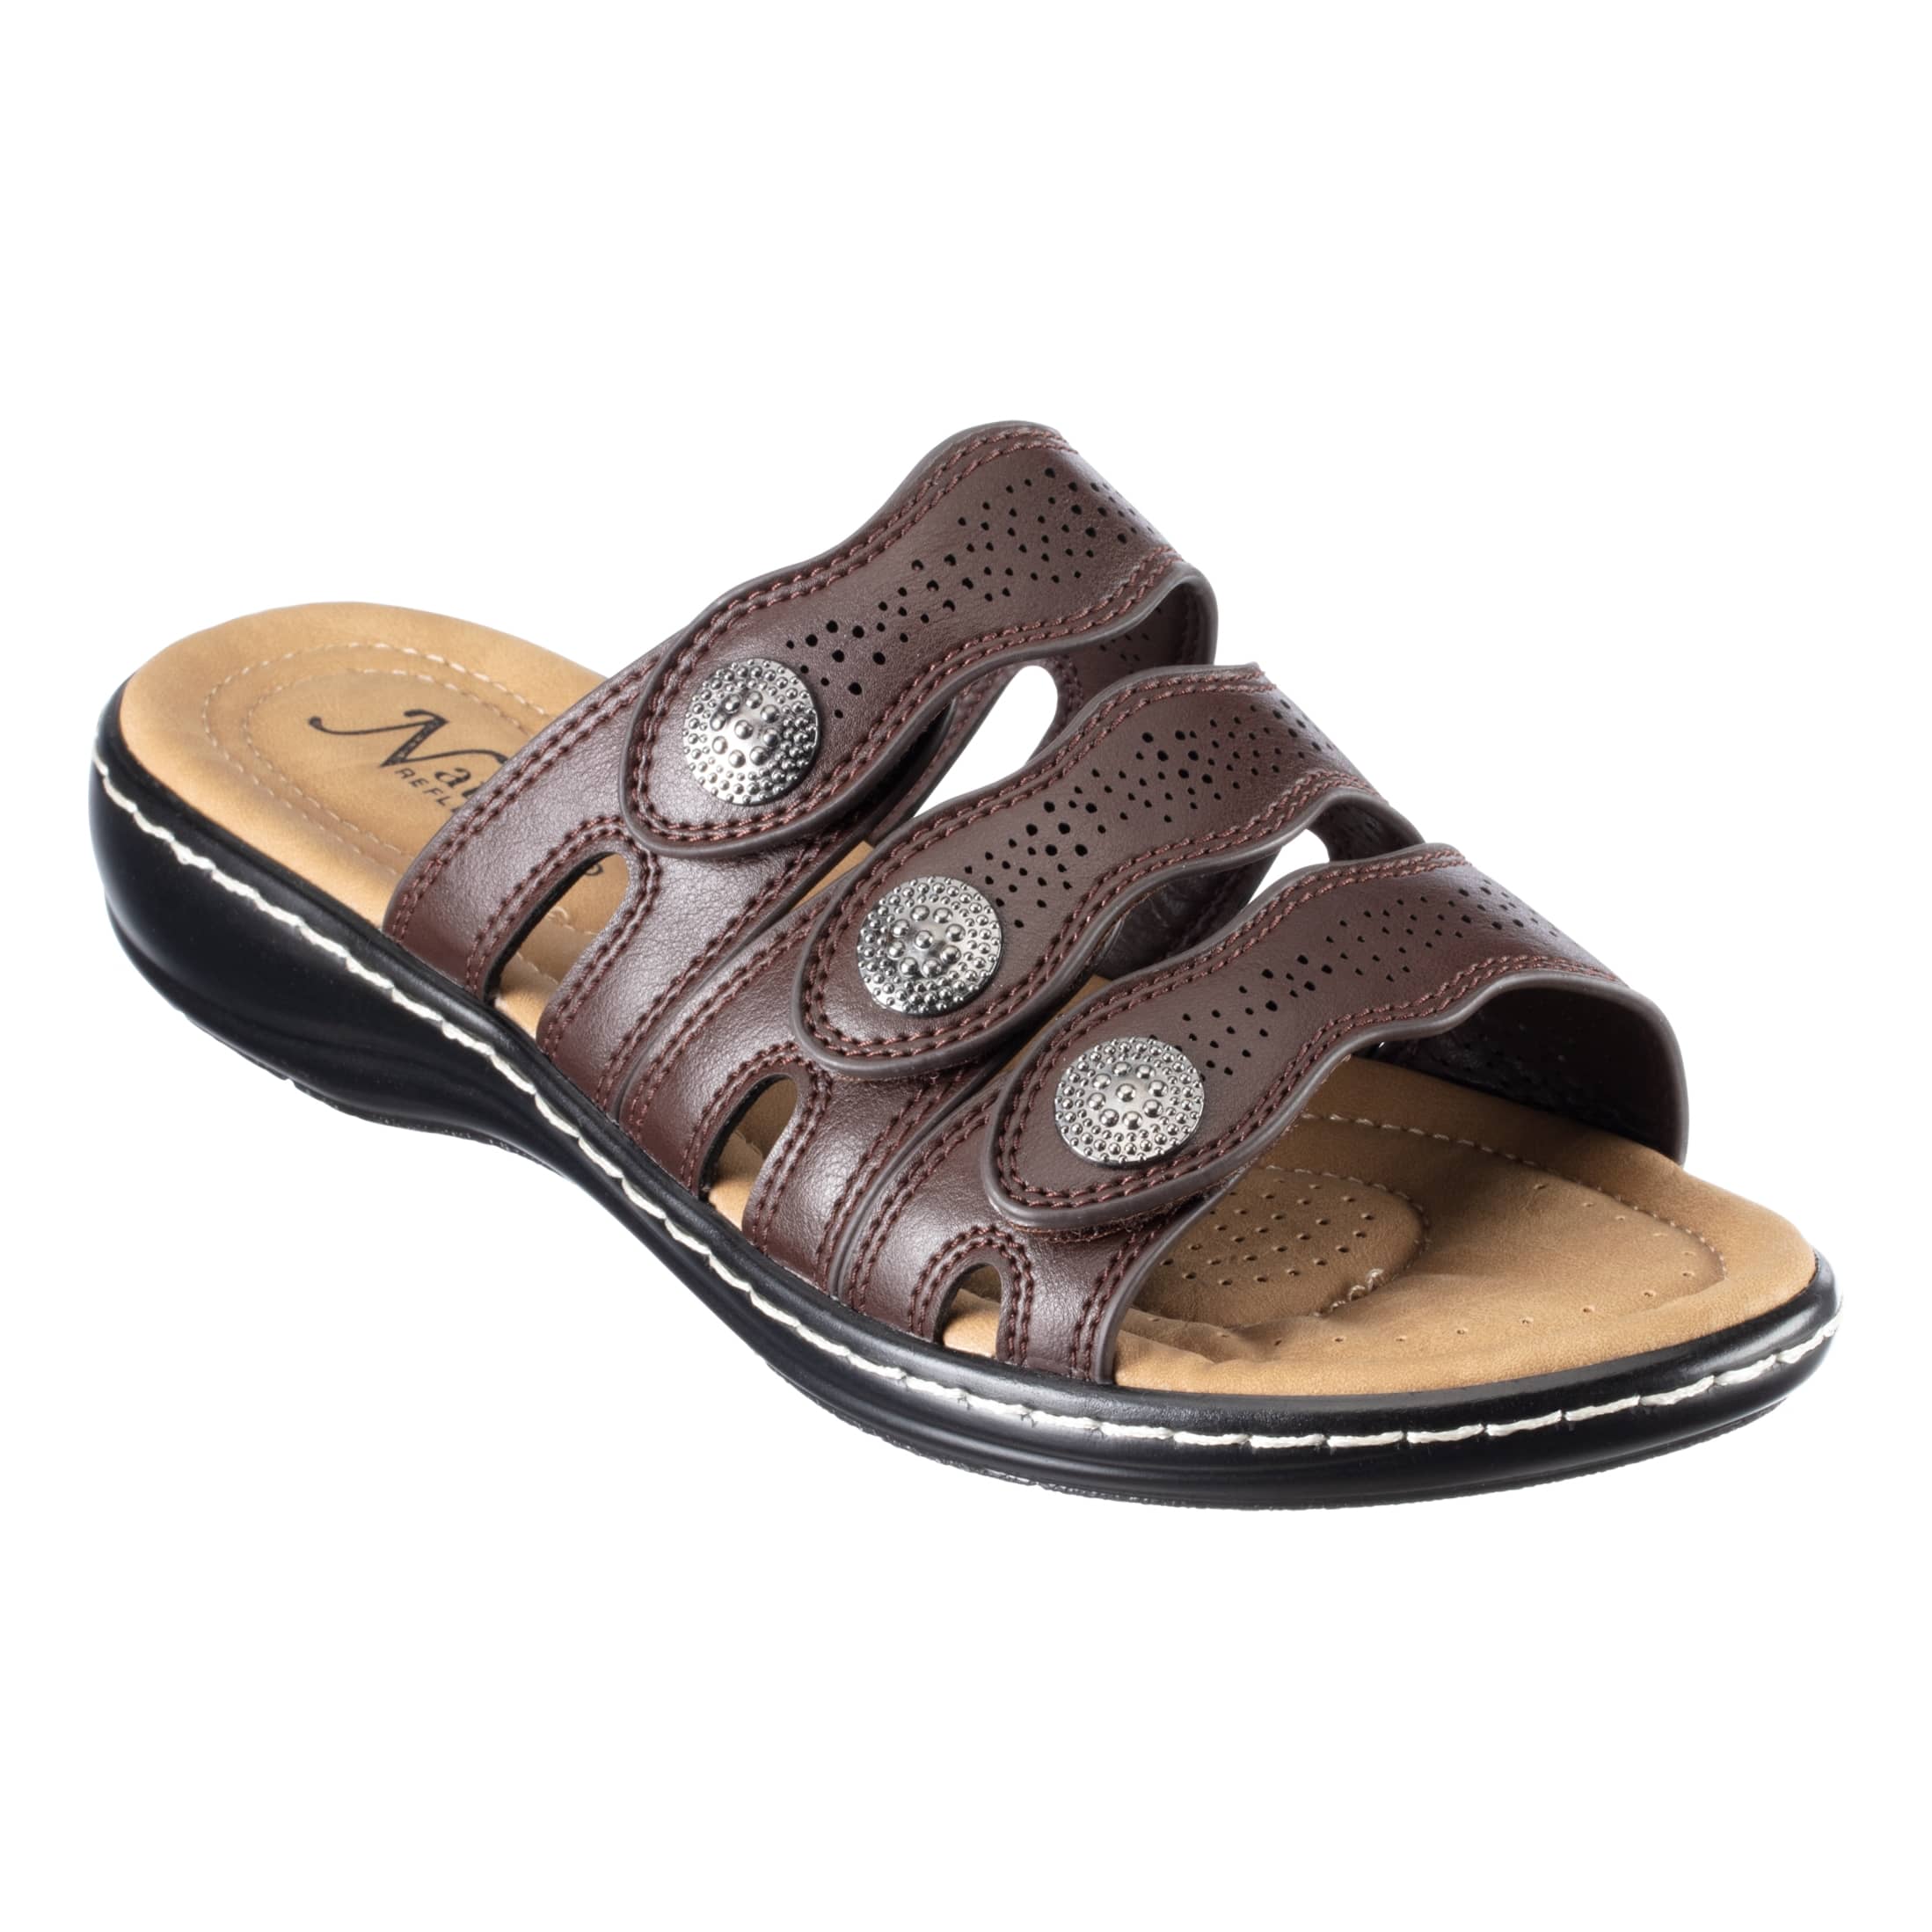 Natural Reflections® Women’s Cami II Wedge Sandals - Brown